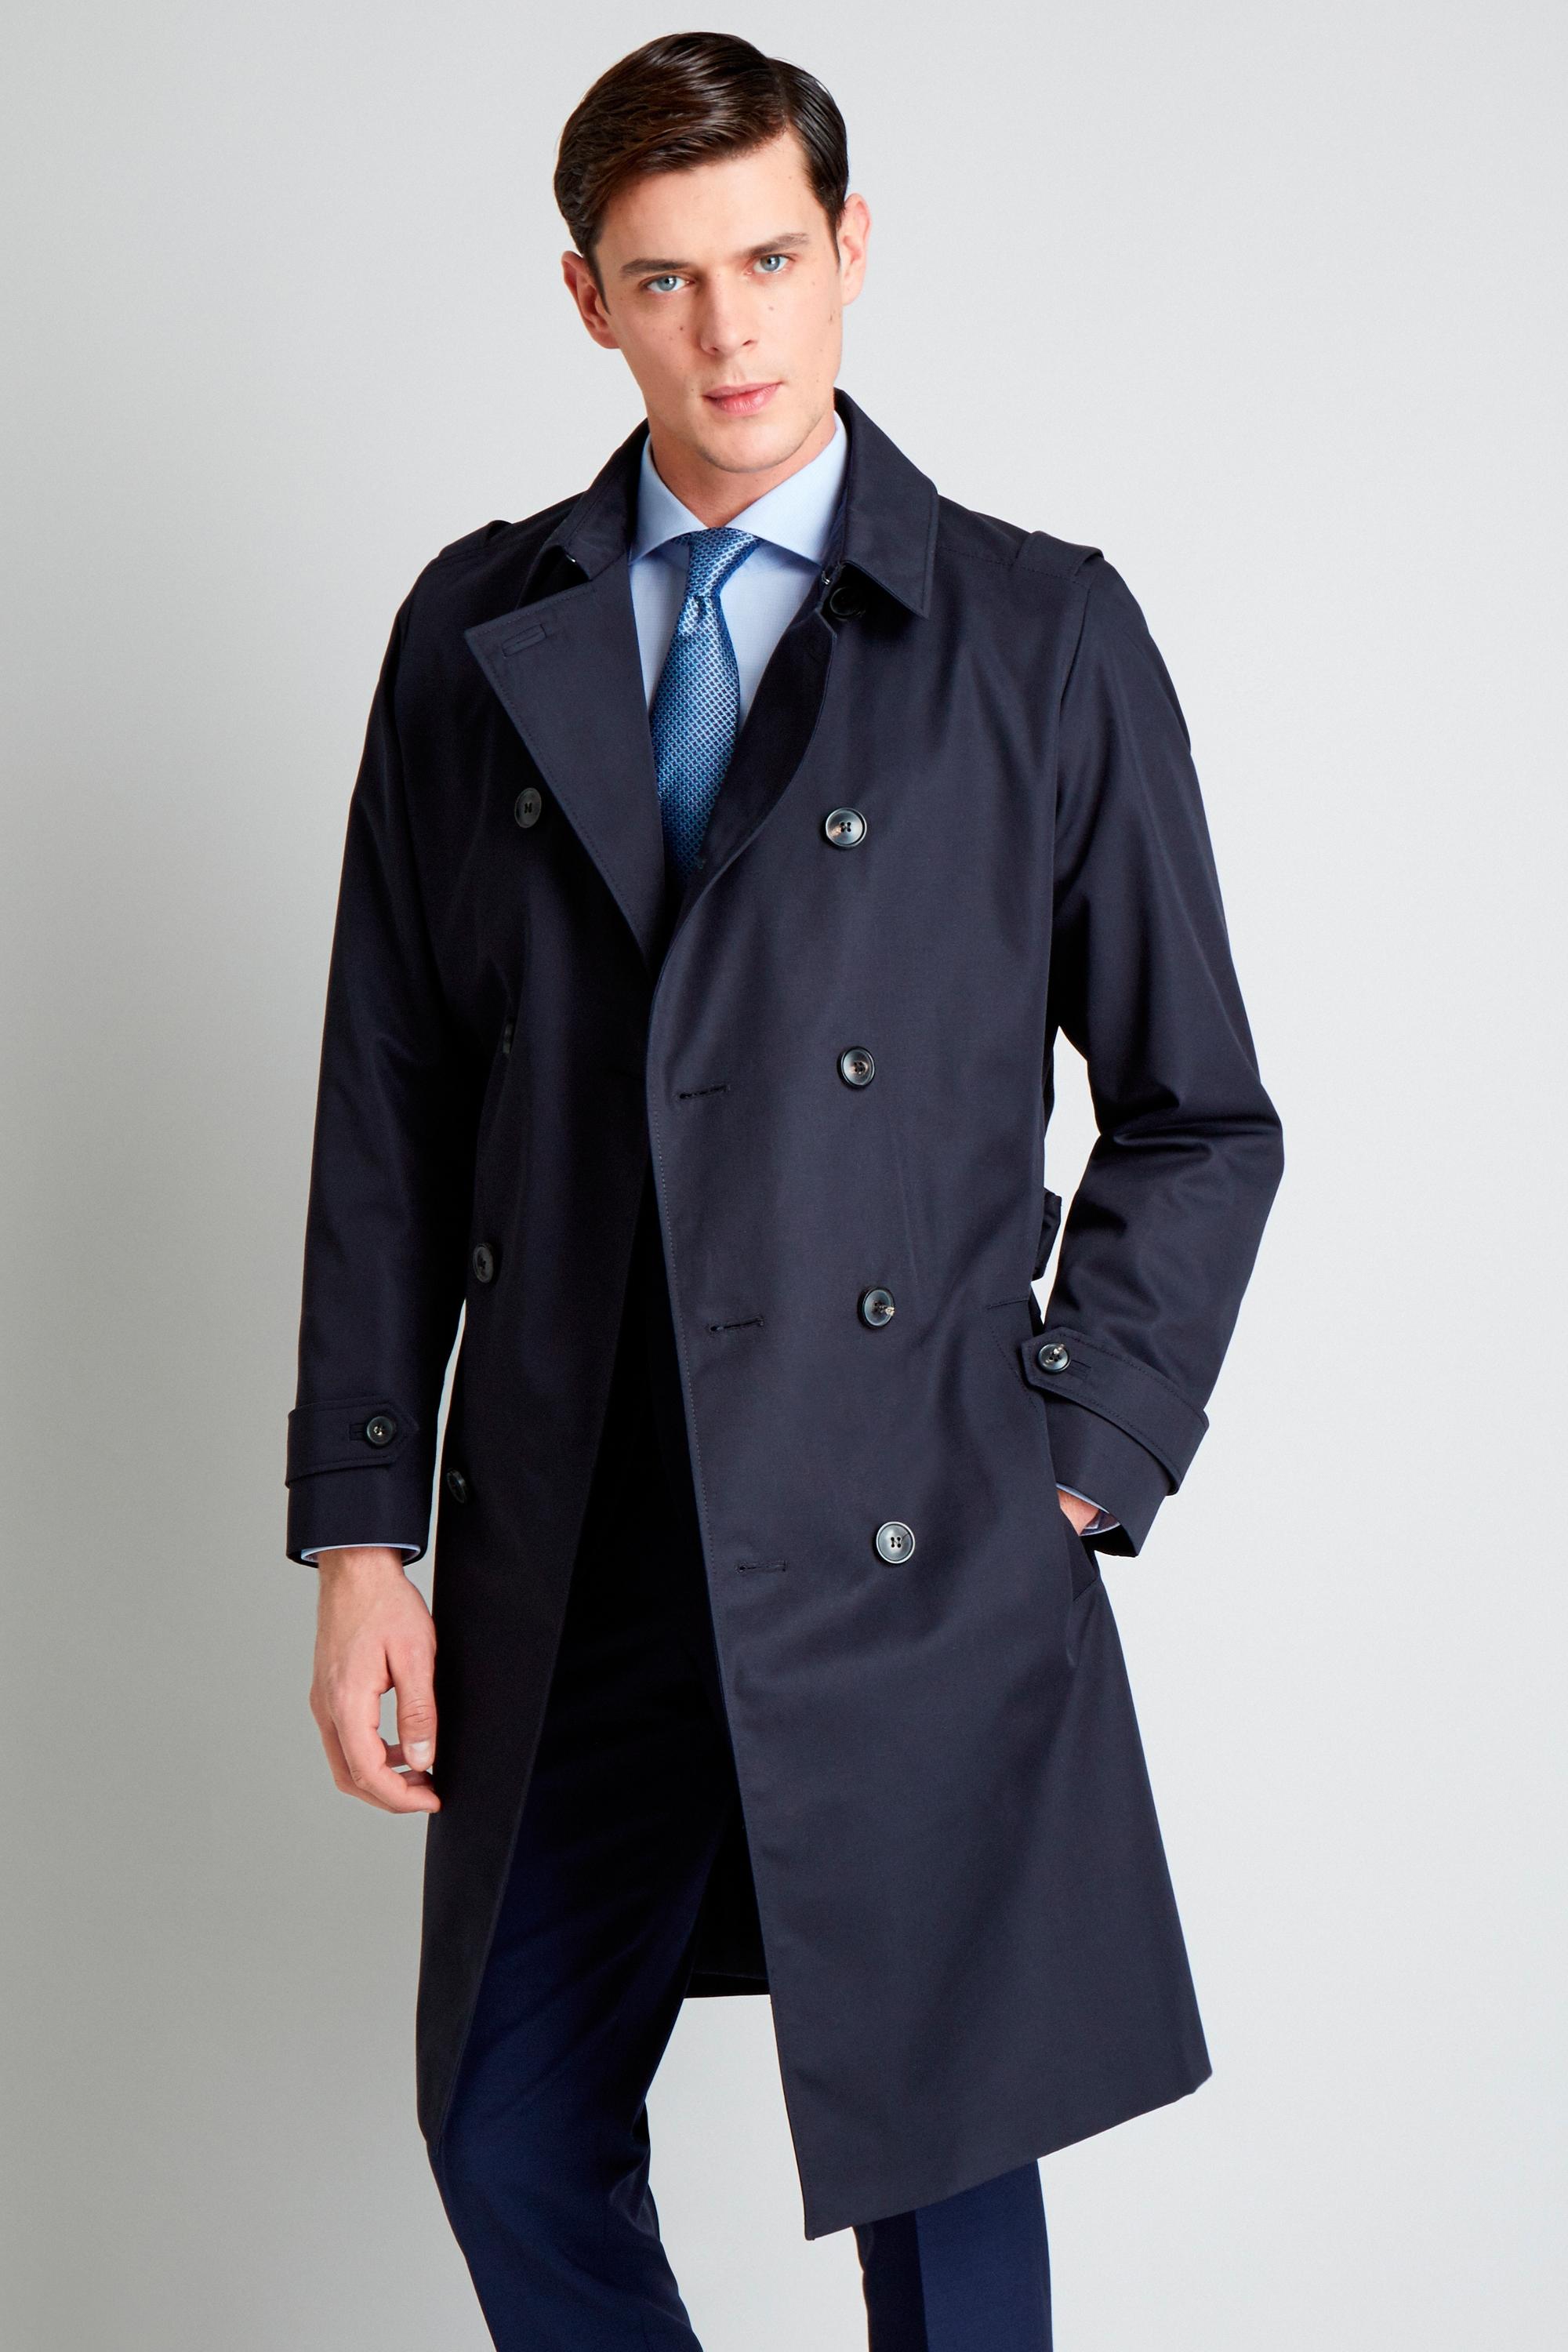 Hugo Boss Navy Trench Coat Top Sellers, SAVE 41% - fearthemecca.com